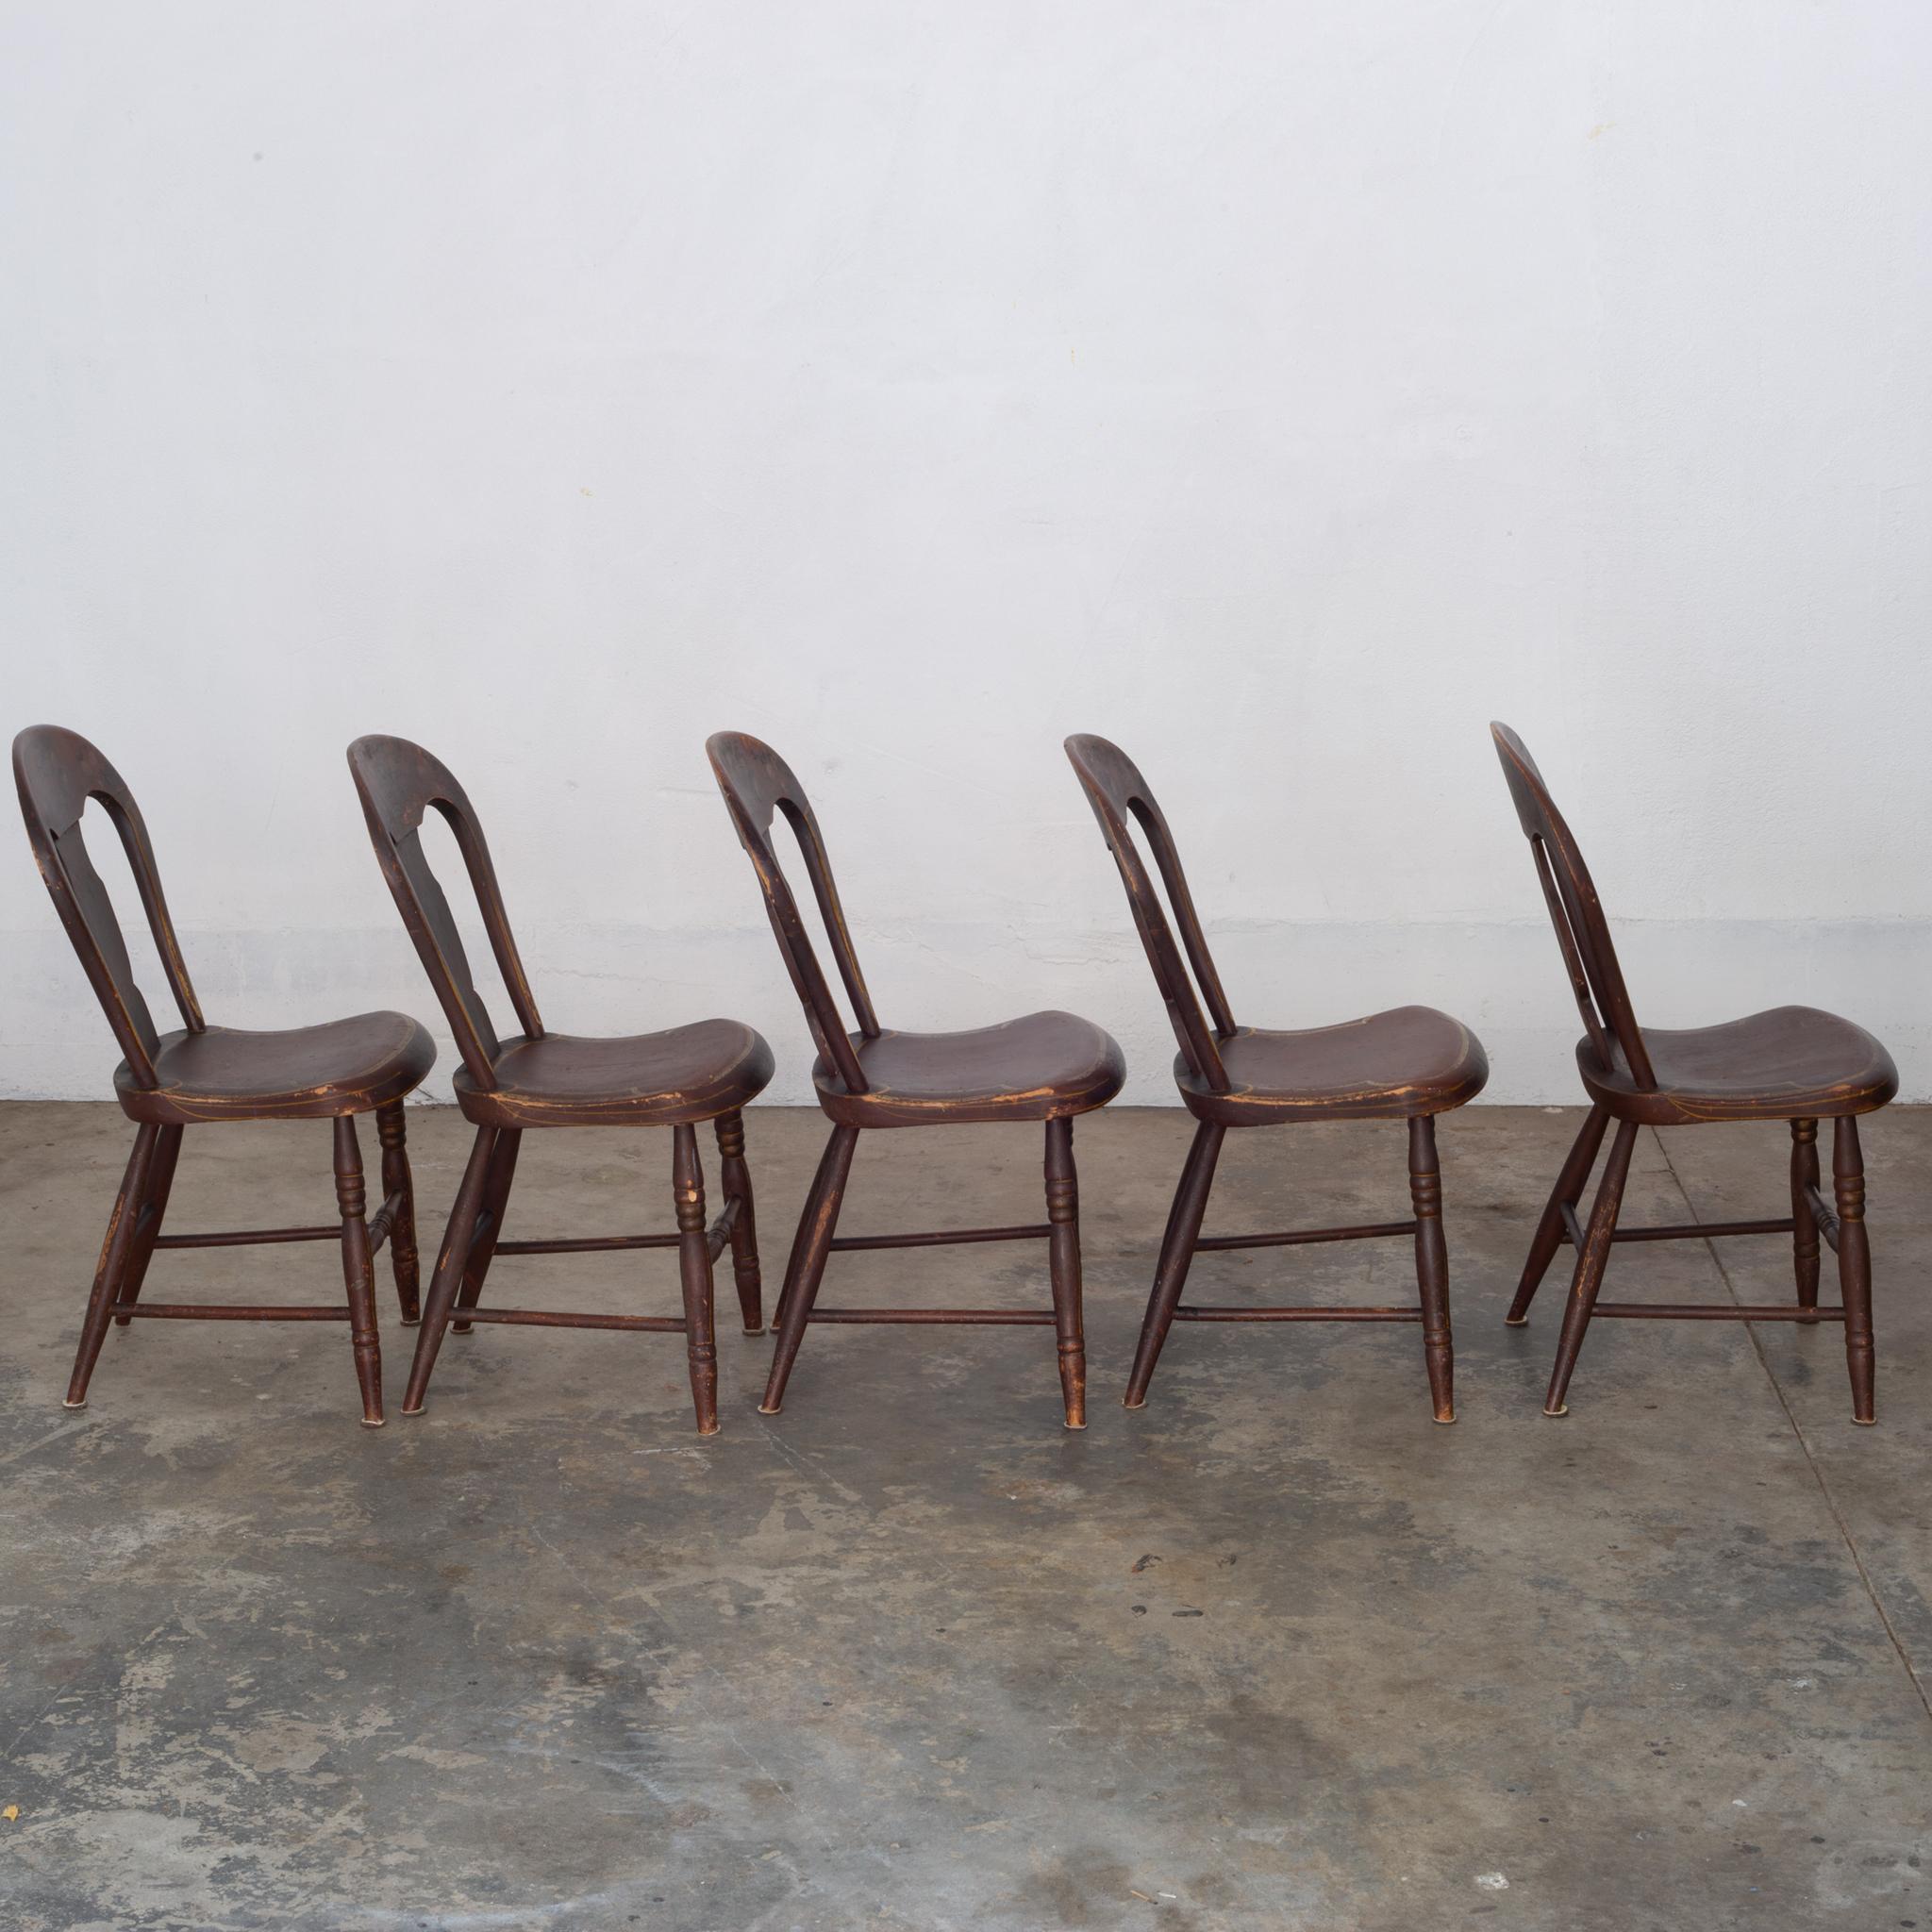 A set of Federal Period Pennsylvania painted chairs. Original reddish brown paint and stenciling. 


Creator: Unknown.
Date of manufacture: circa 1810.
Materials and techniques: mixed hard and soft woods.
Condition: Good. Wear consistent with age